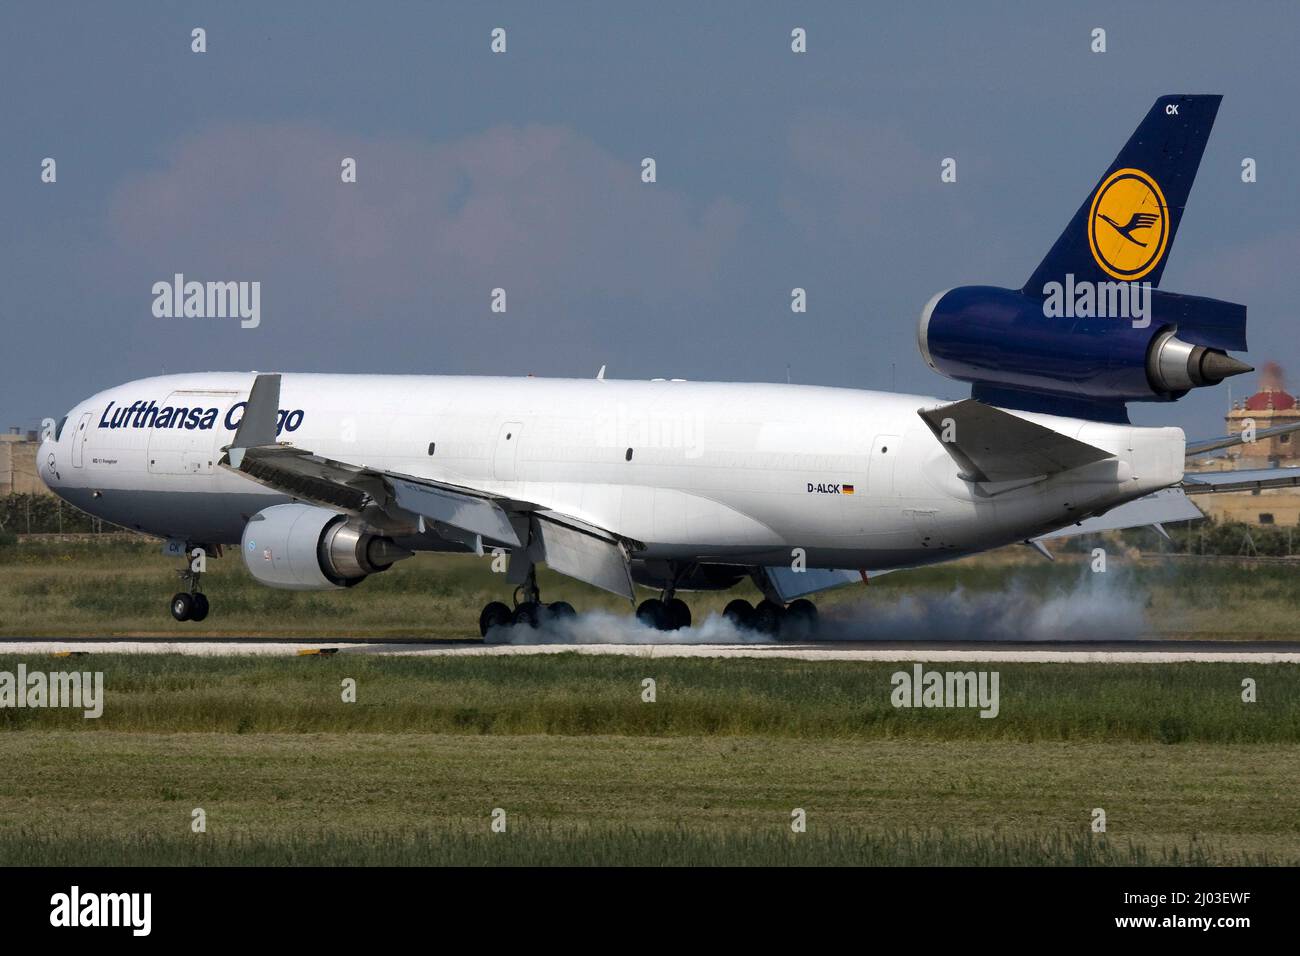 Lufthansa Cargo McDonnell Douglas MD-11F (REG: D-ALCK) touching down and burning rubber on runway 31. Stock Photo